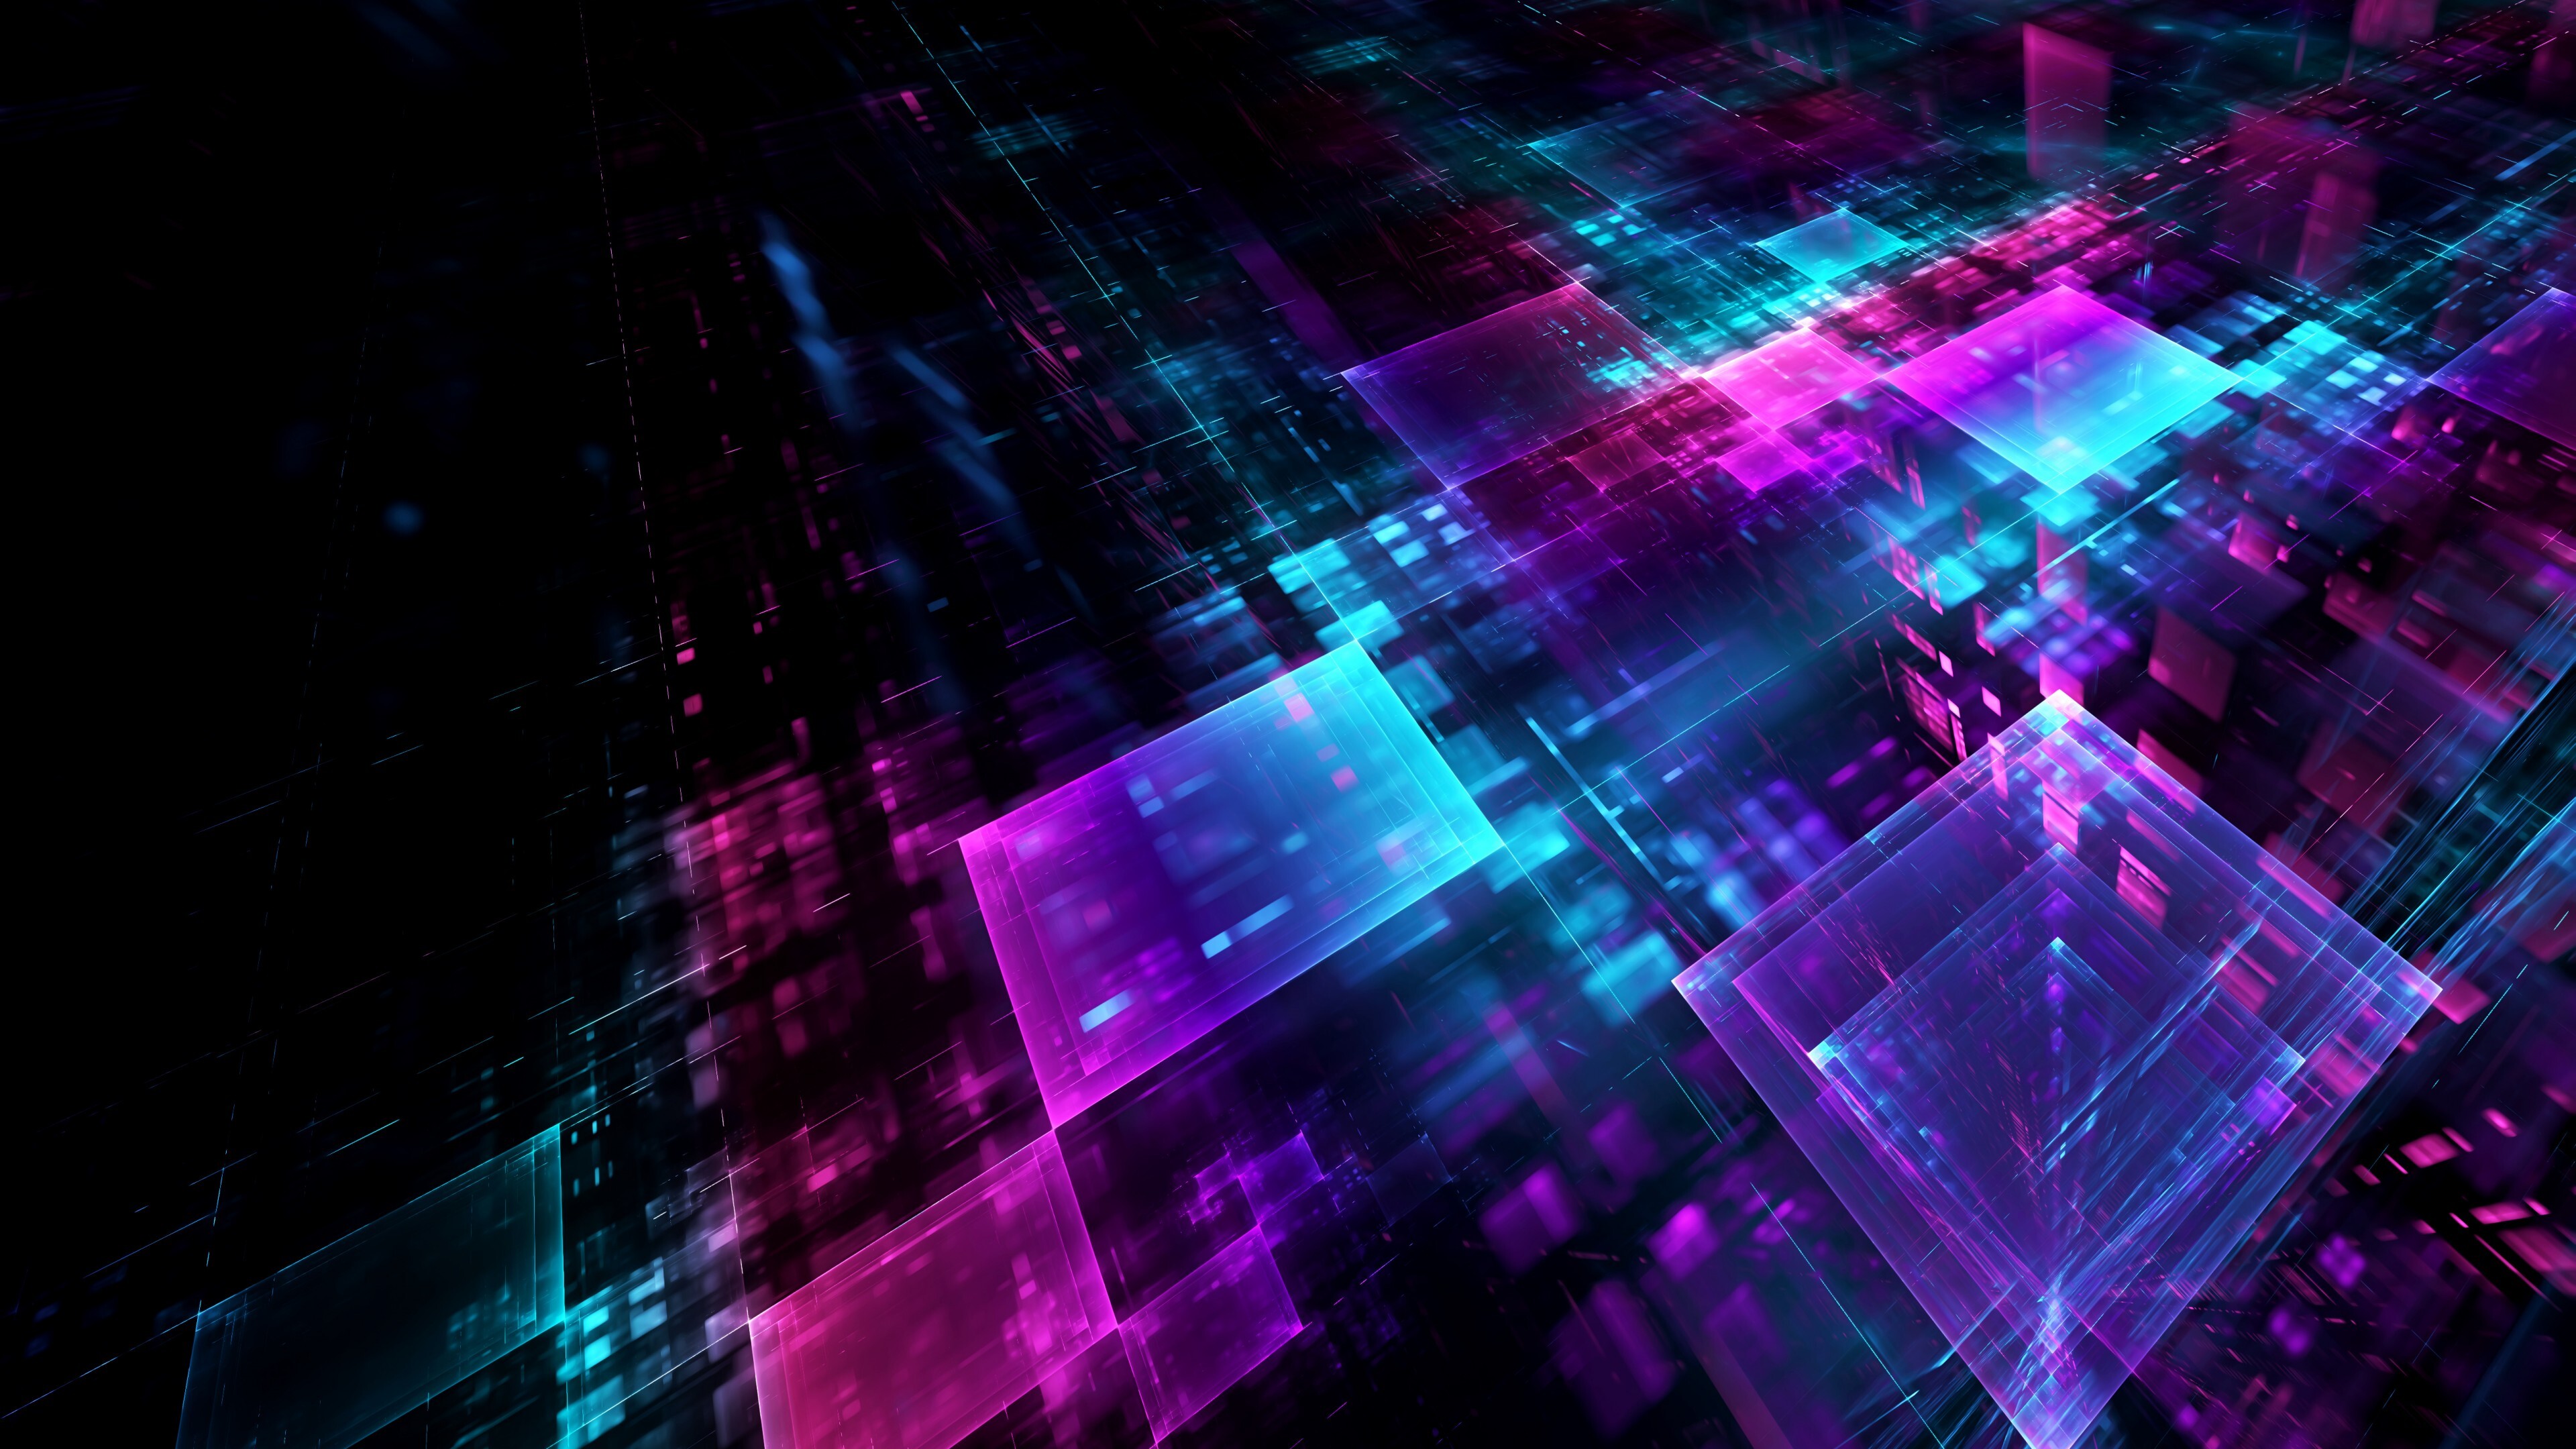 Geometry: Digital, Cubes, Lines, Abstract, Three-dimensional figures. 3840x2160 4K Background.